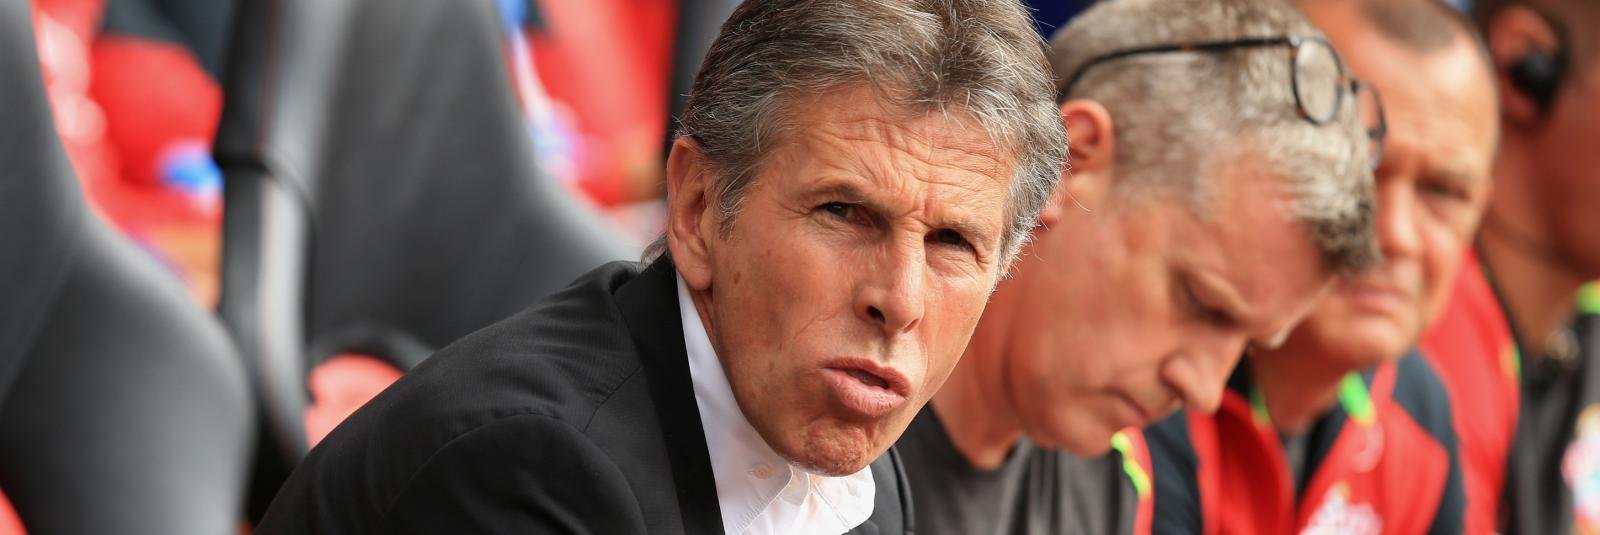 Southampton will follow their Deadline Day trend, but it’ll be ‘smart business’